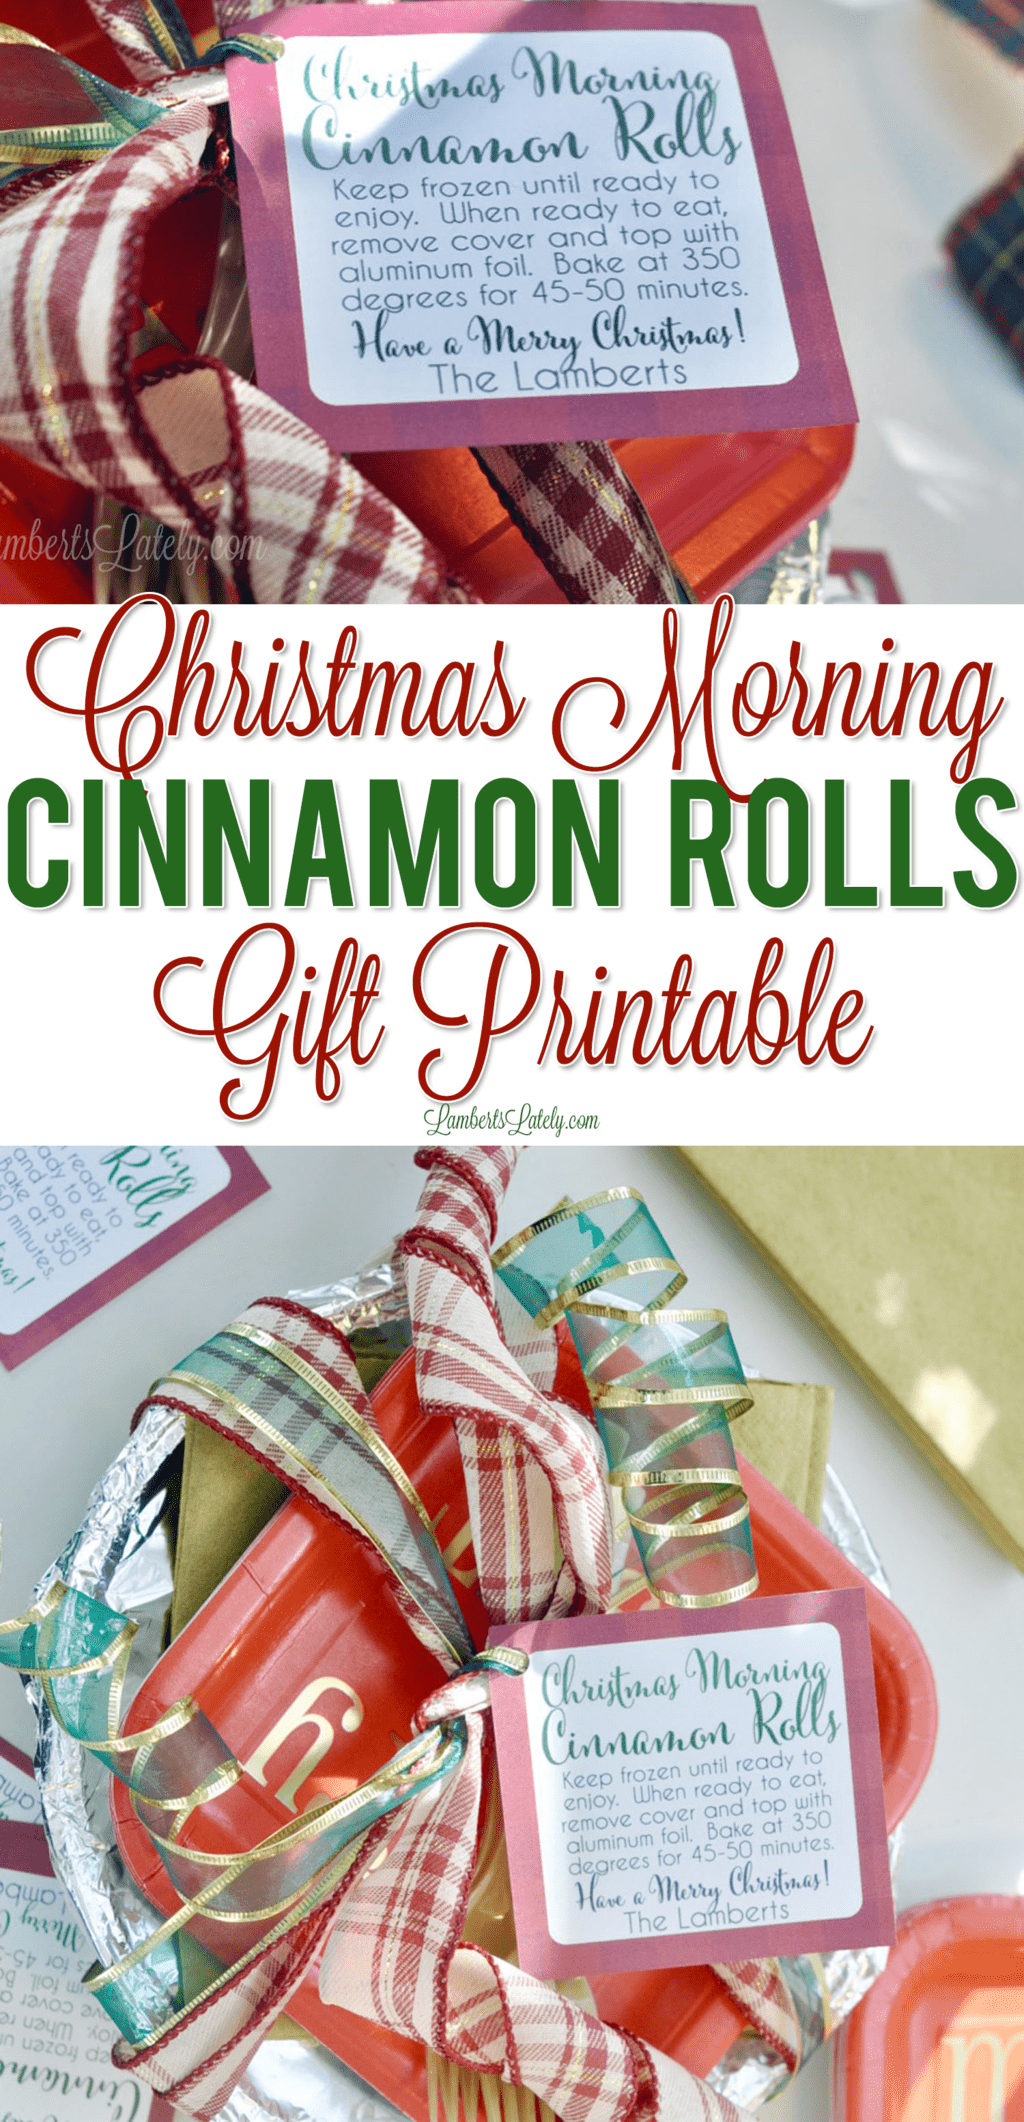 Need a cute, easy neighbor or friend gifts?  These Christmas morning cinnamon rolls are perfect!  Grab a free printable gift tag and check out cute wrapping/packaging ideas.